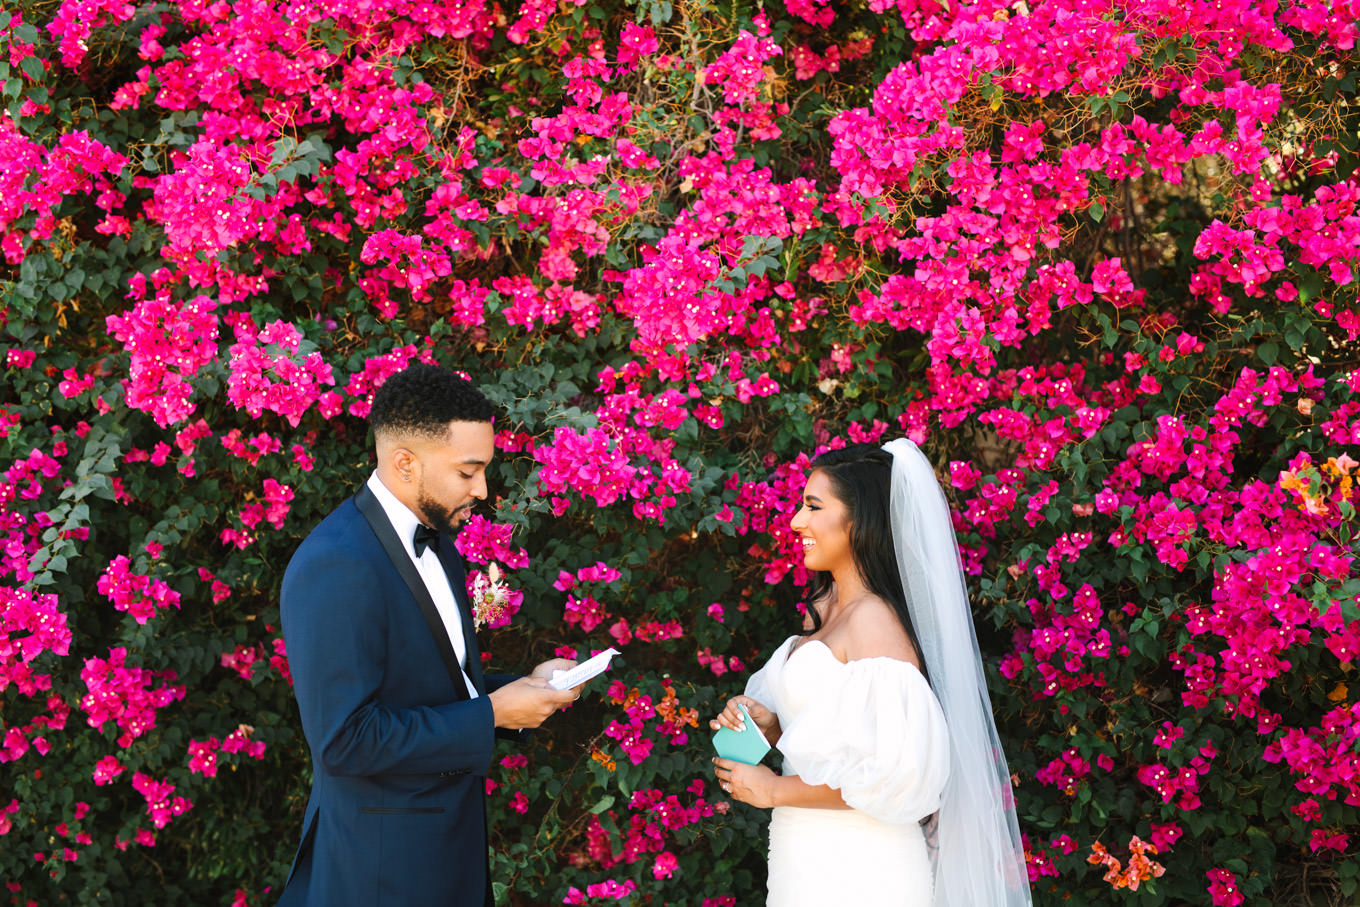 Vow exchange in front of bougainvillea | Engagement, elopement, and wedding photography roundup of Mary Costa’s favorite images from 2020 | Colorful and elevated photography for fun-loving couples in Southern California | #2020wedding #elopement #weddingphoto #weddingphotography #microwedding   Source: Mary Costa Photography | Los Angeles